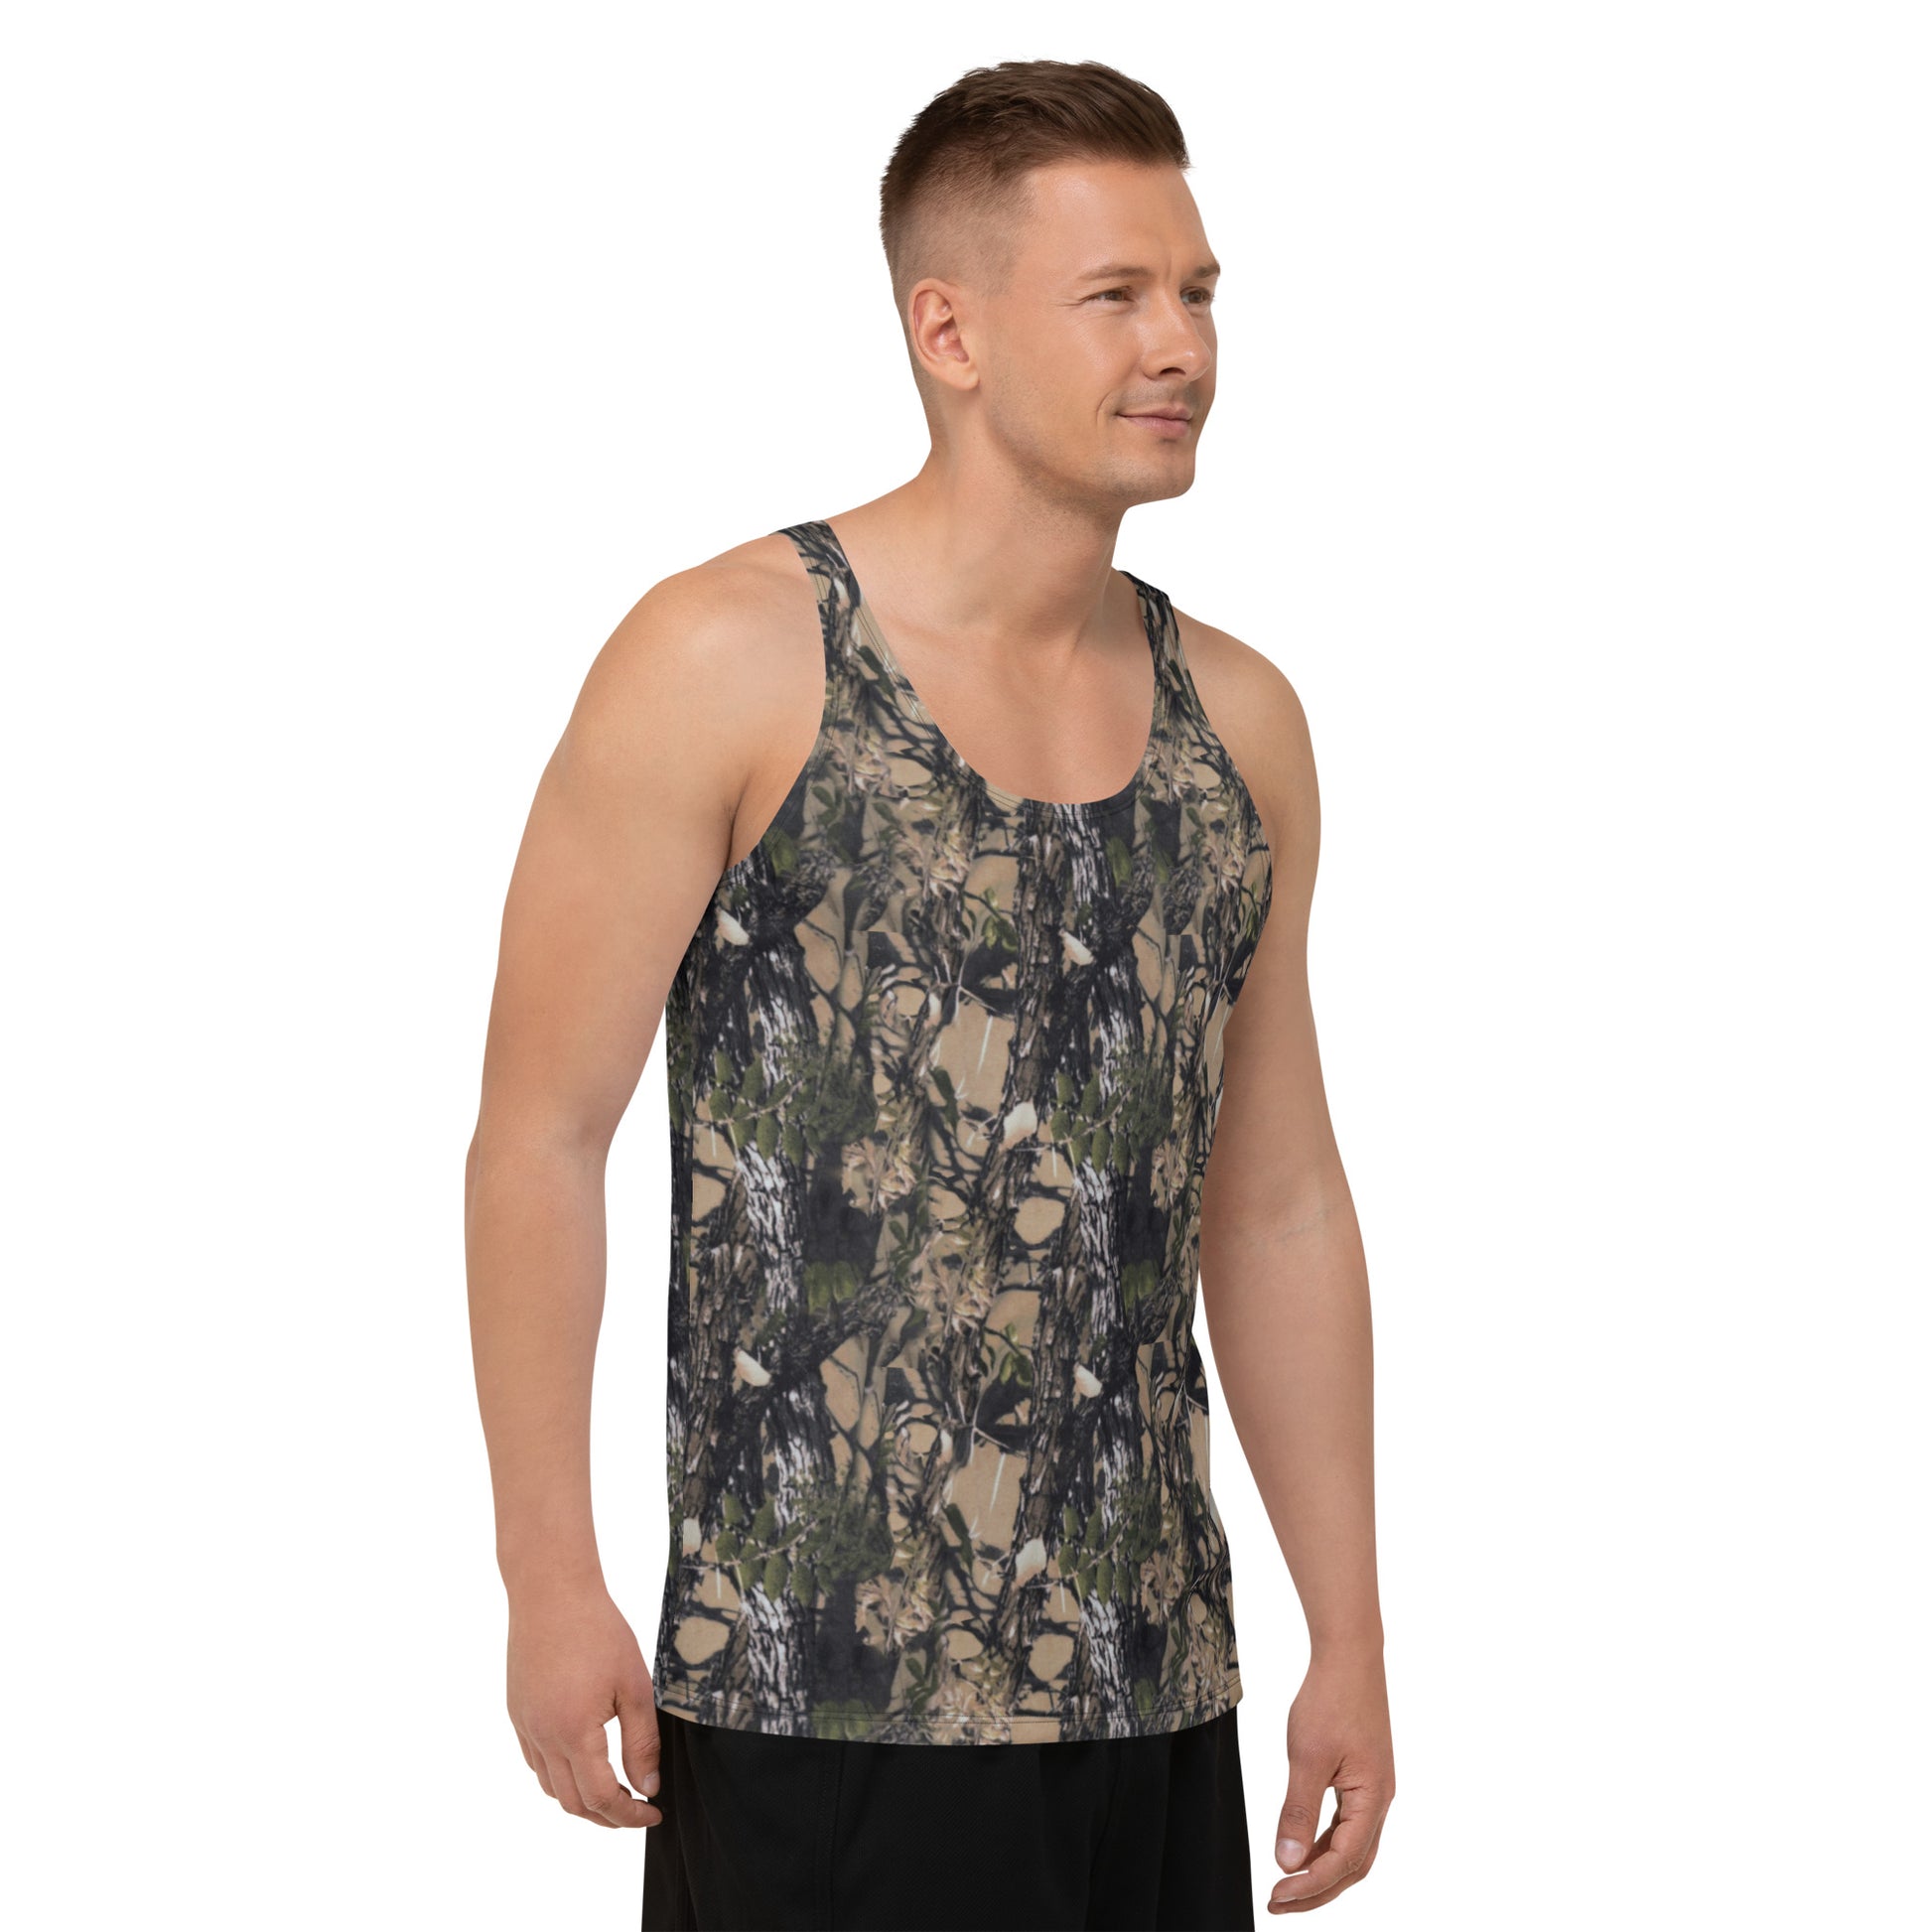 a picture of a man wearing a unisex all over printed Camouflage tank top - right front side